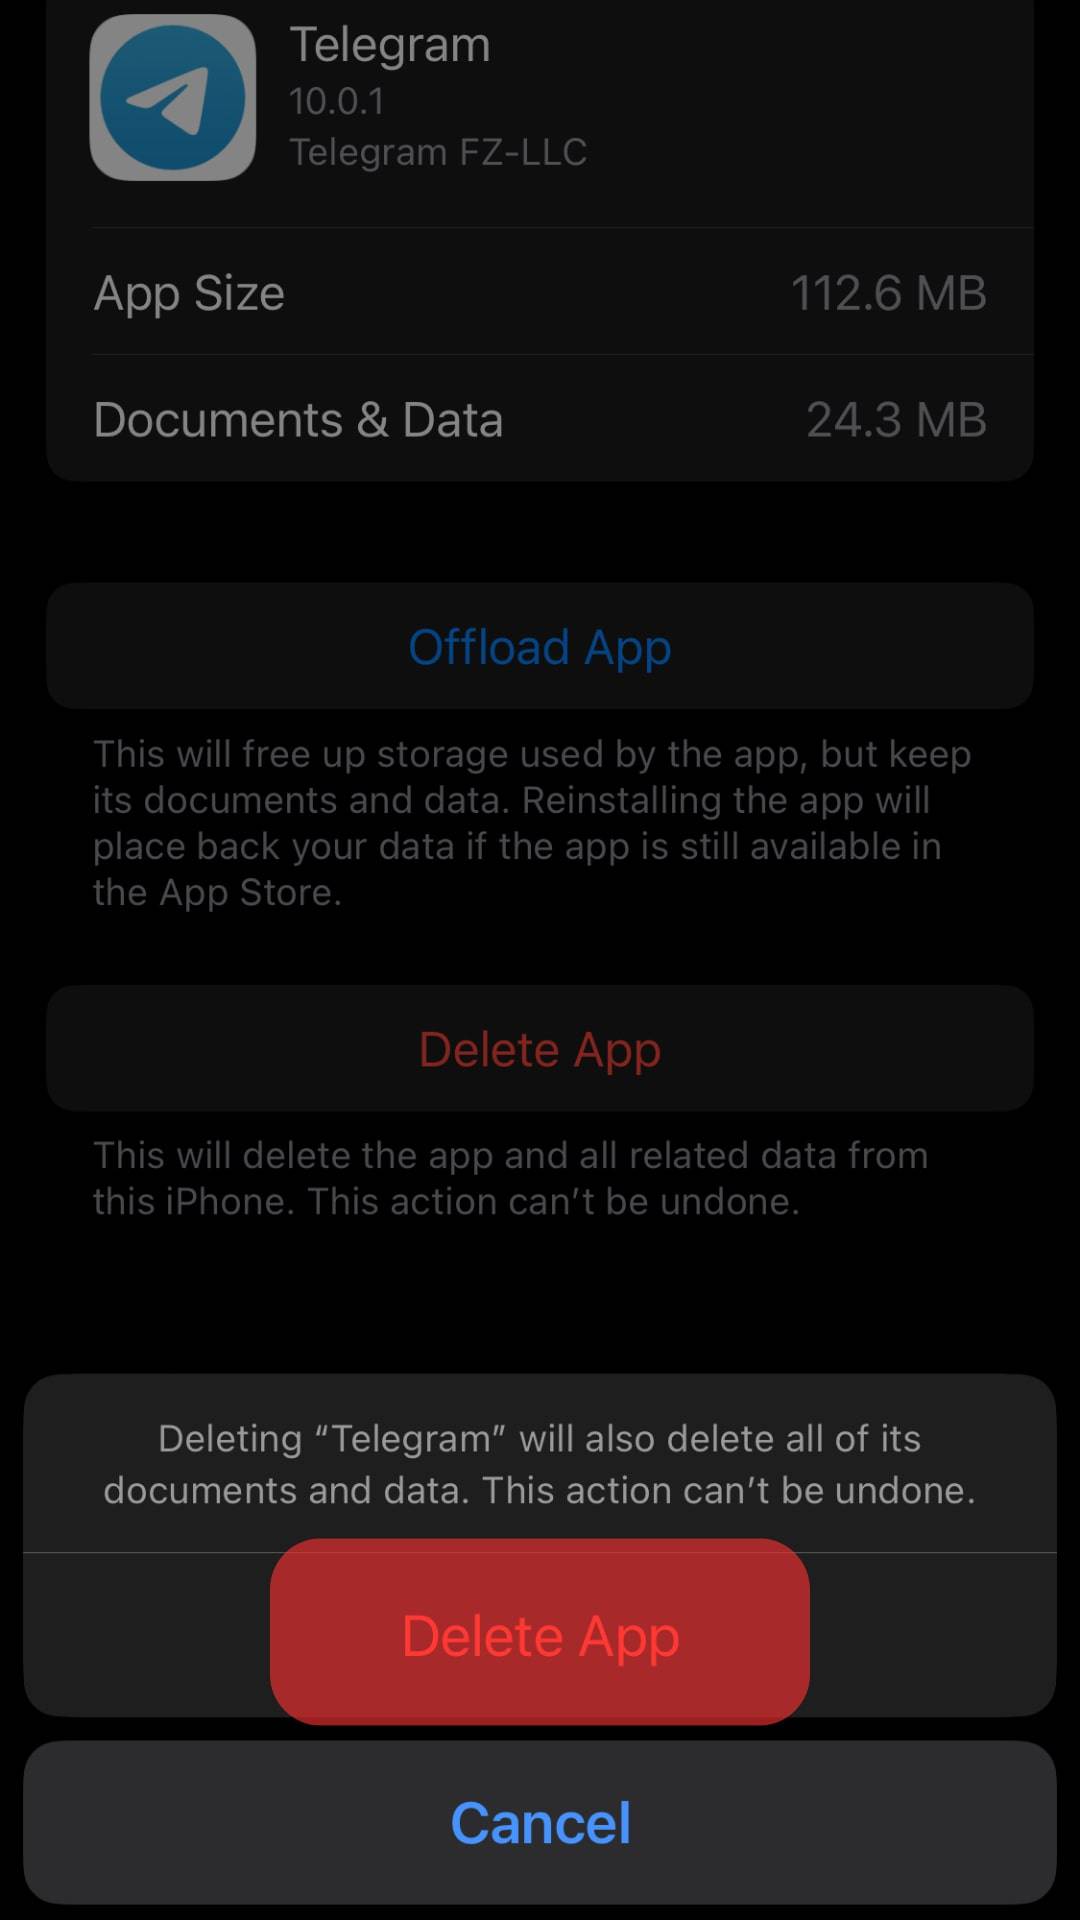 Confirm Your Action By Clicking Delete App Again.